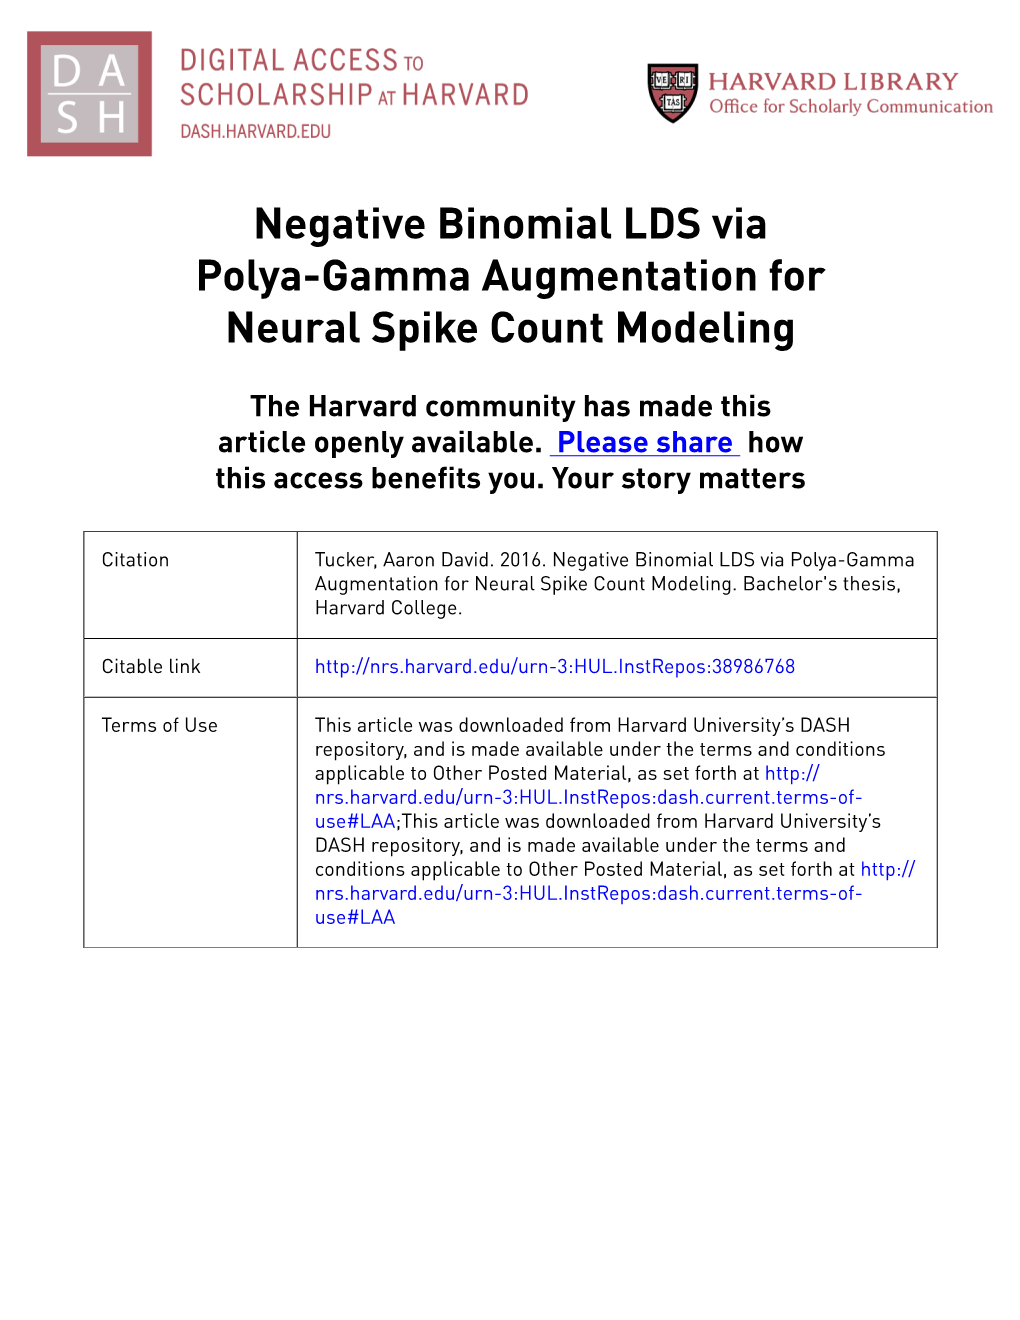 Negative Binomial LDS Via Polya-Gamma Augmentation for Neural Spike Count Modeling